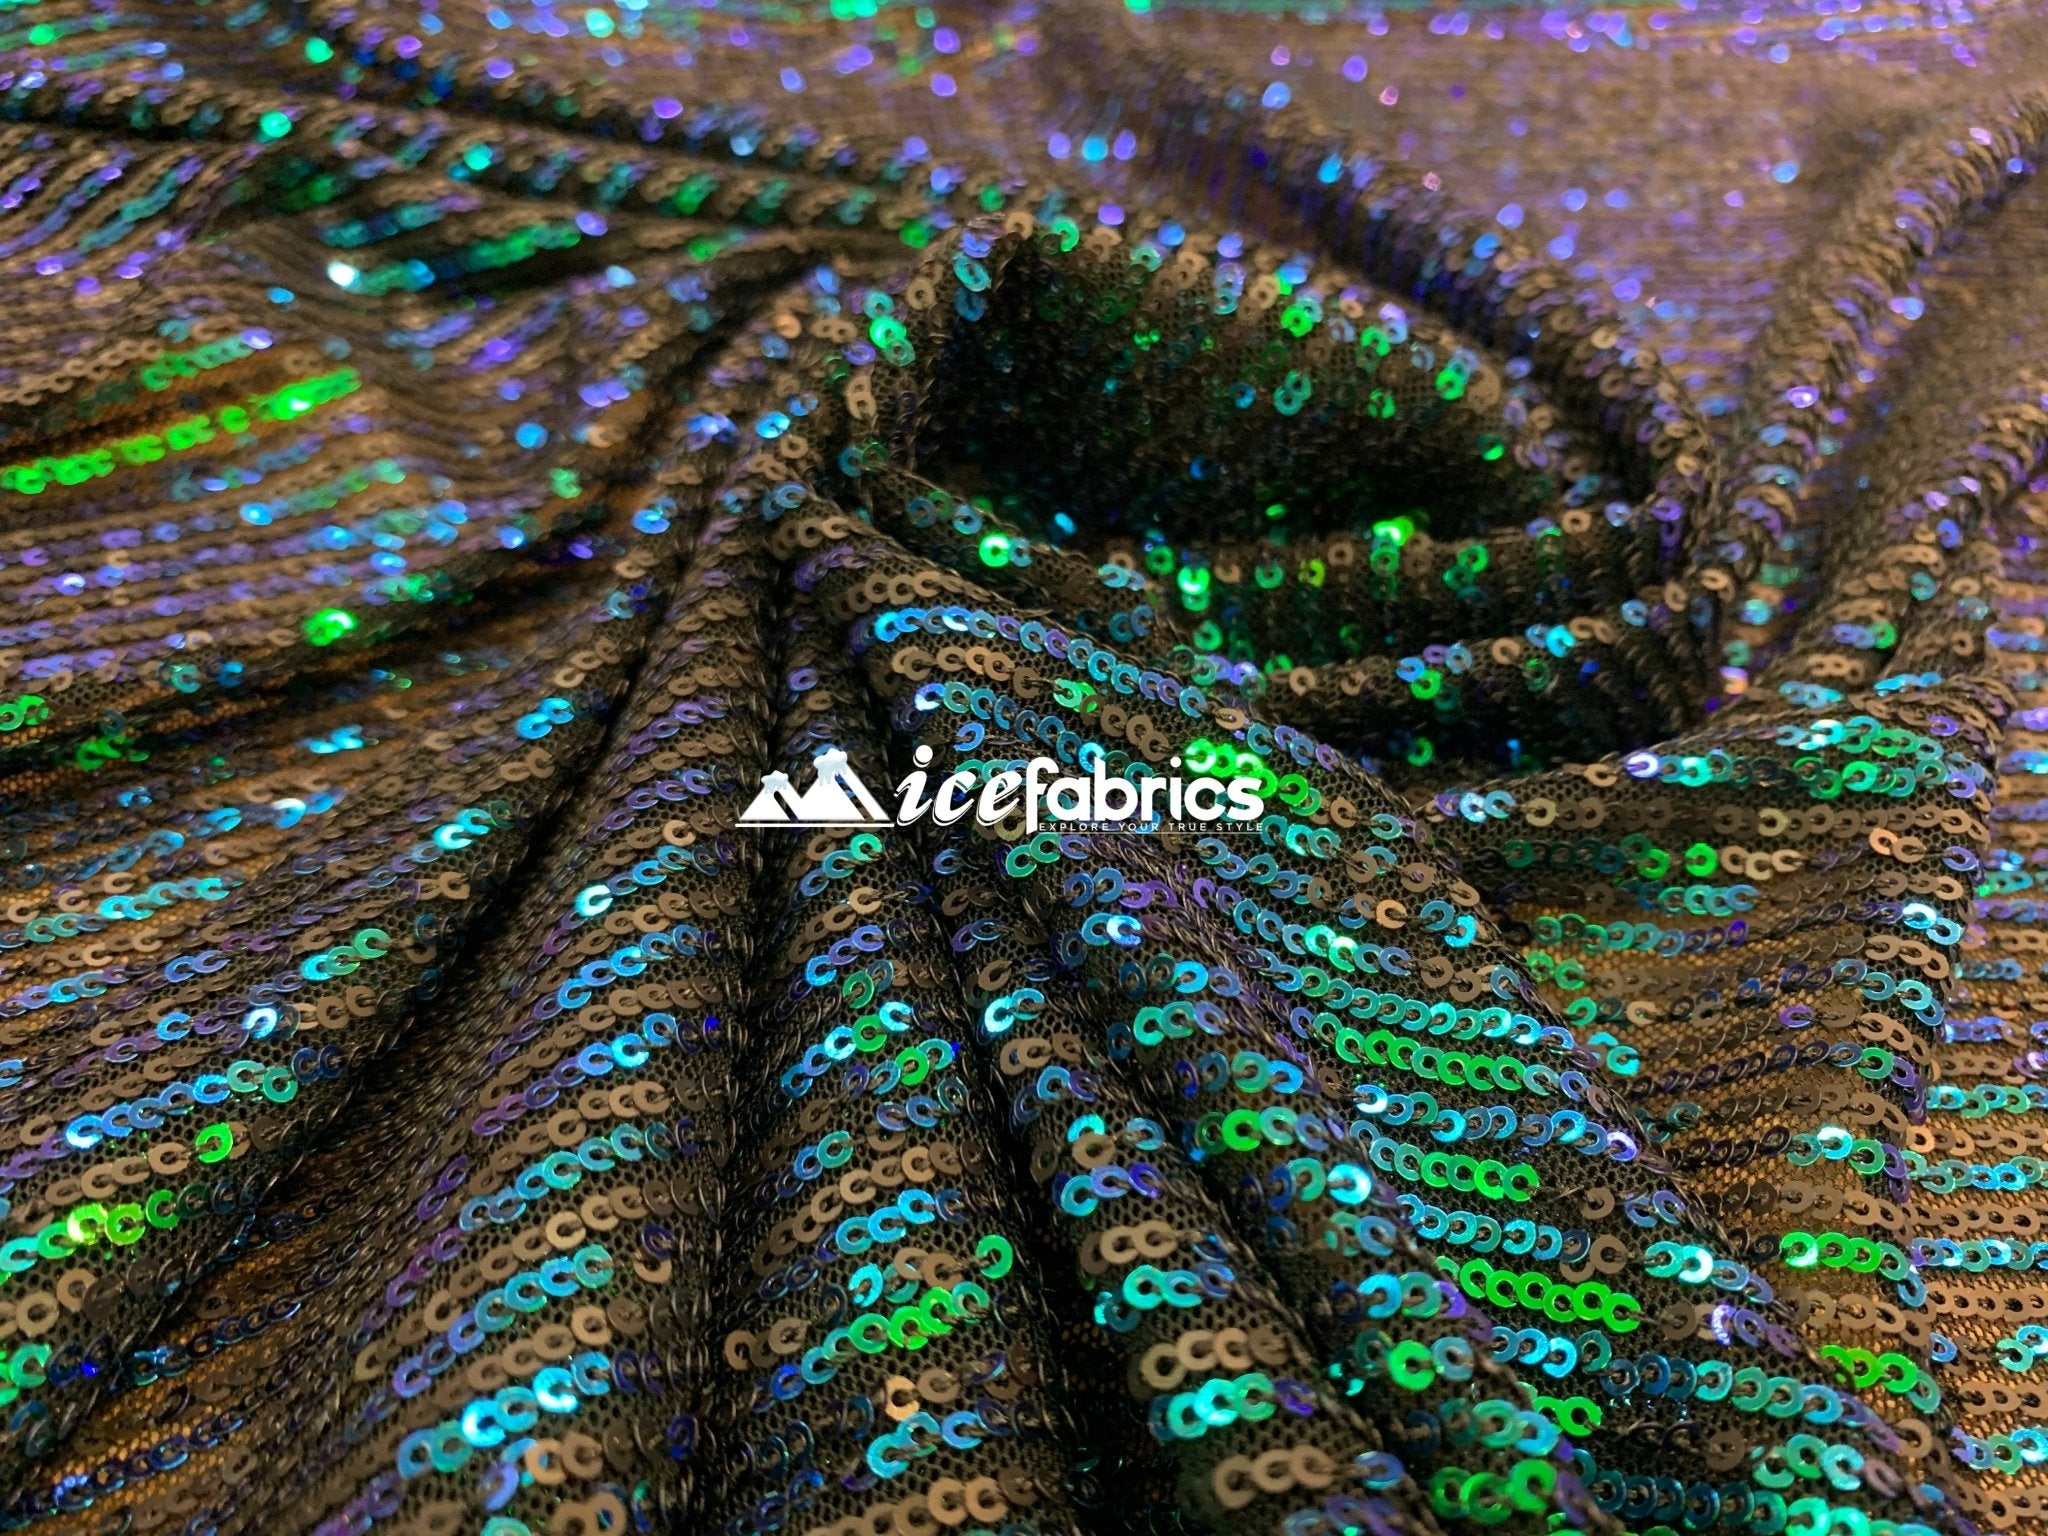 Green Iridescent Sequin 2 Way Mesh Stretch Sequins Fabric By The YardICEFABRICICE FABRICSGreen Iridescent Sequin 2 Way Mesh Stretch Sequins Fabric By The Yard ICEFABRIC